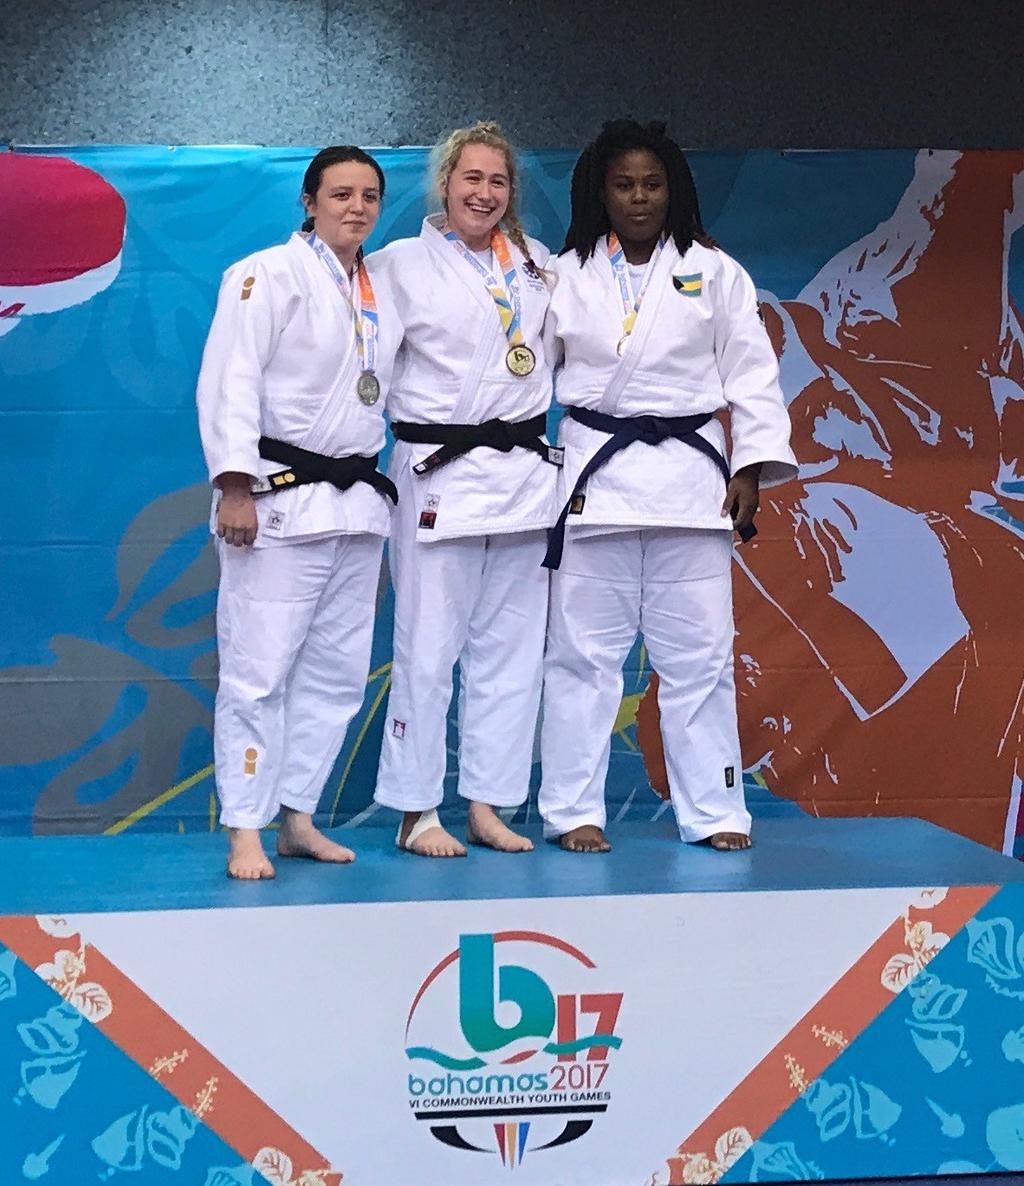 Performance To cap a memorable event for Team NI and NI Judo, Kirstie was awarded the honour of Flag-bearer for Team NI in the CYG Opening Ceremony.